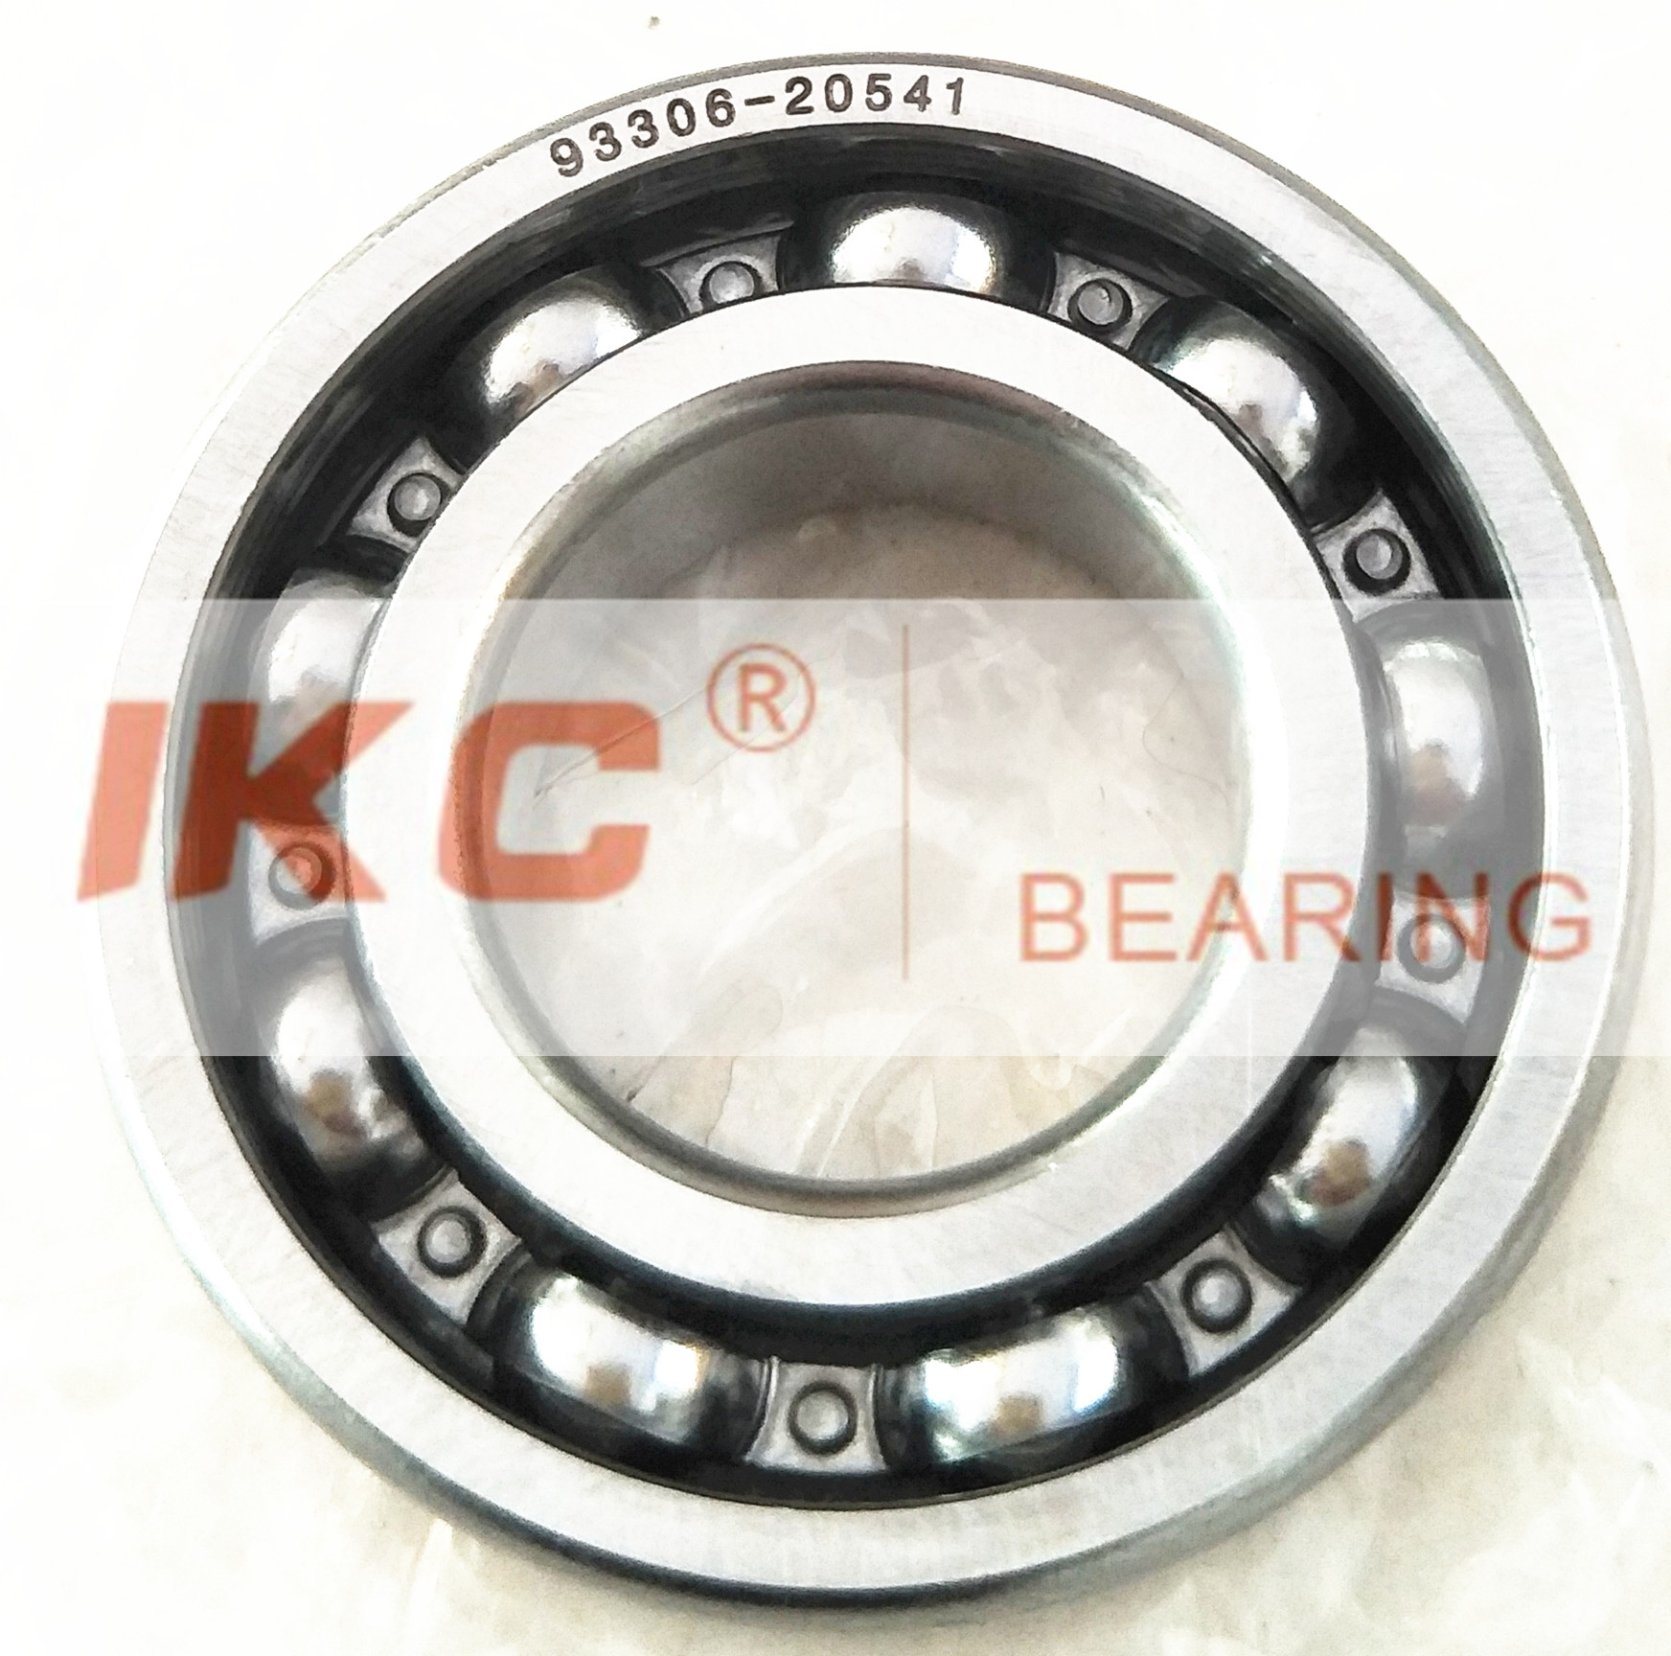 93306-20541 YAMAHA Outboard Spare Part Engine Bearing 9.9HP, 15HP, 20HP, 25HP, 30HP, 40HP, 48HP, 60HP, 70HP, 80HP, 100HP (93306-20541-00)